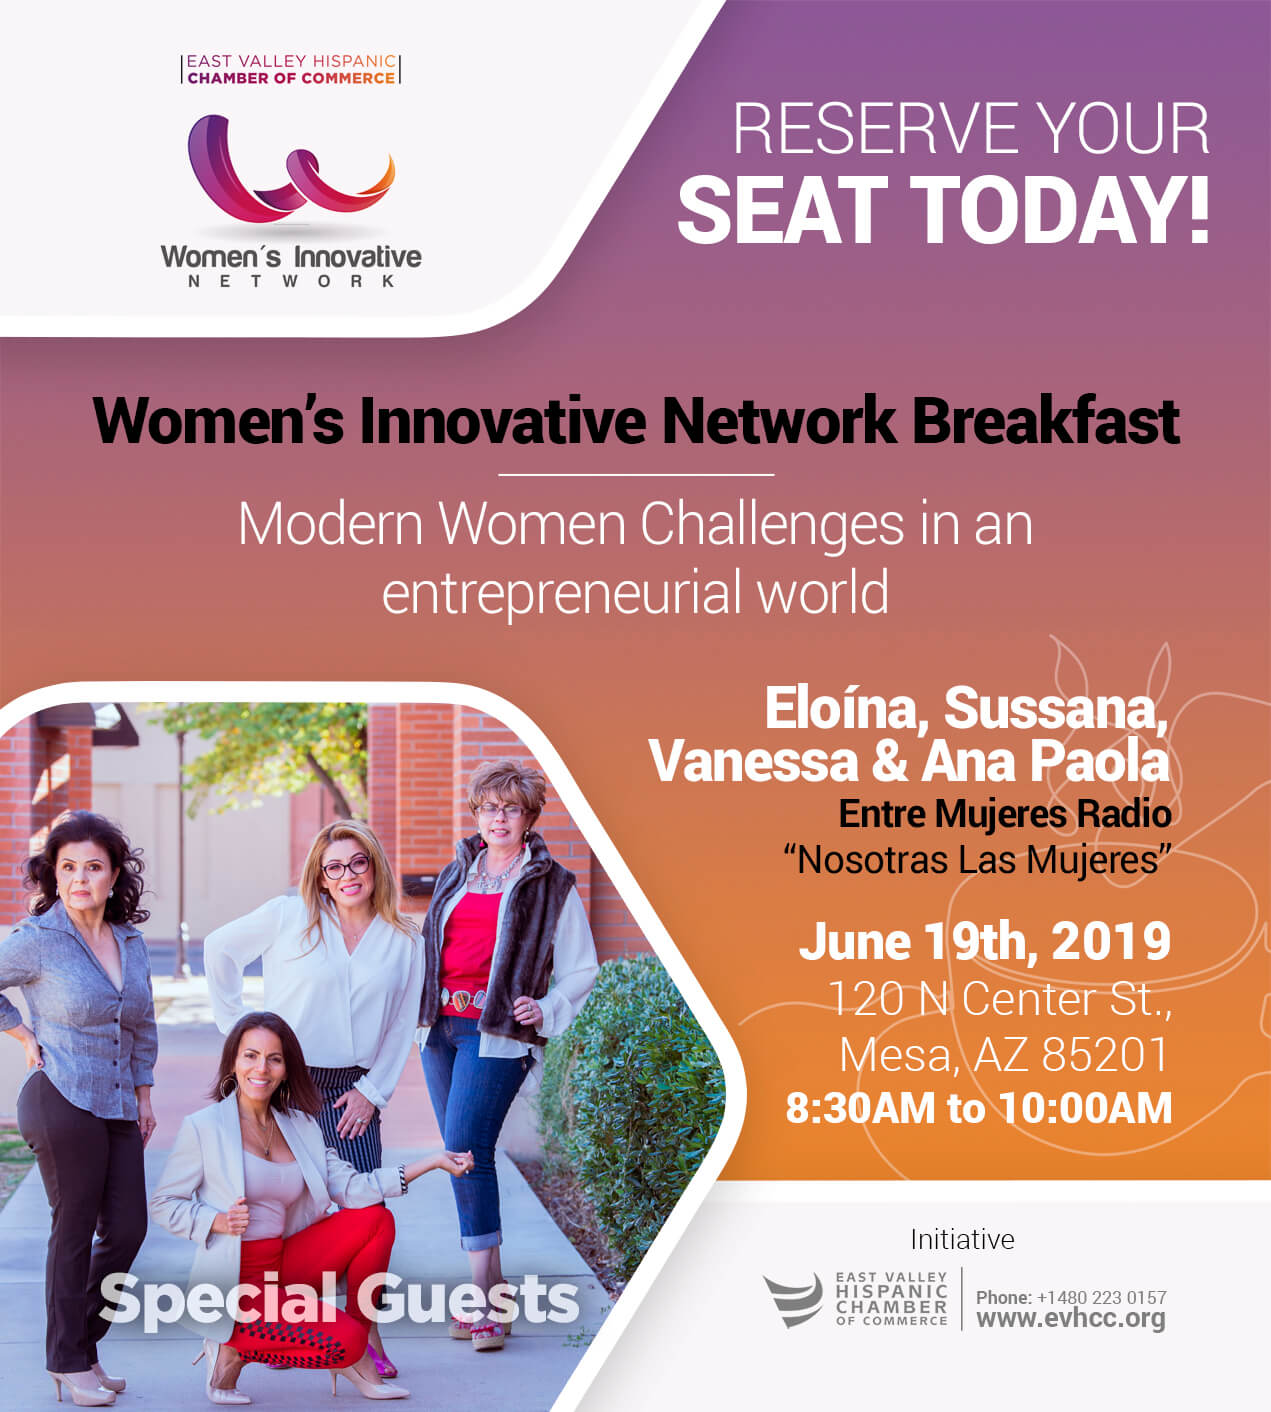 Women's Innovative Network Breakfast by the East Valley Hispanic Chamber of Commerce